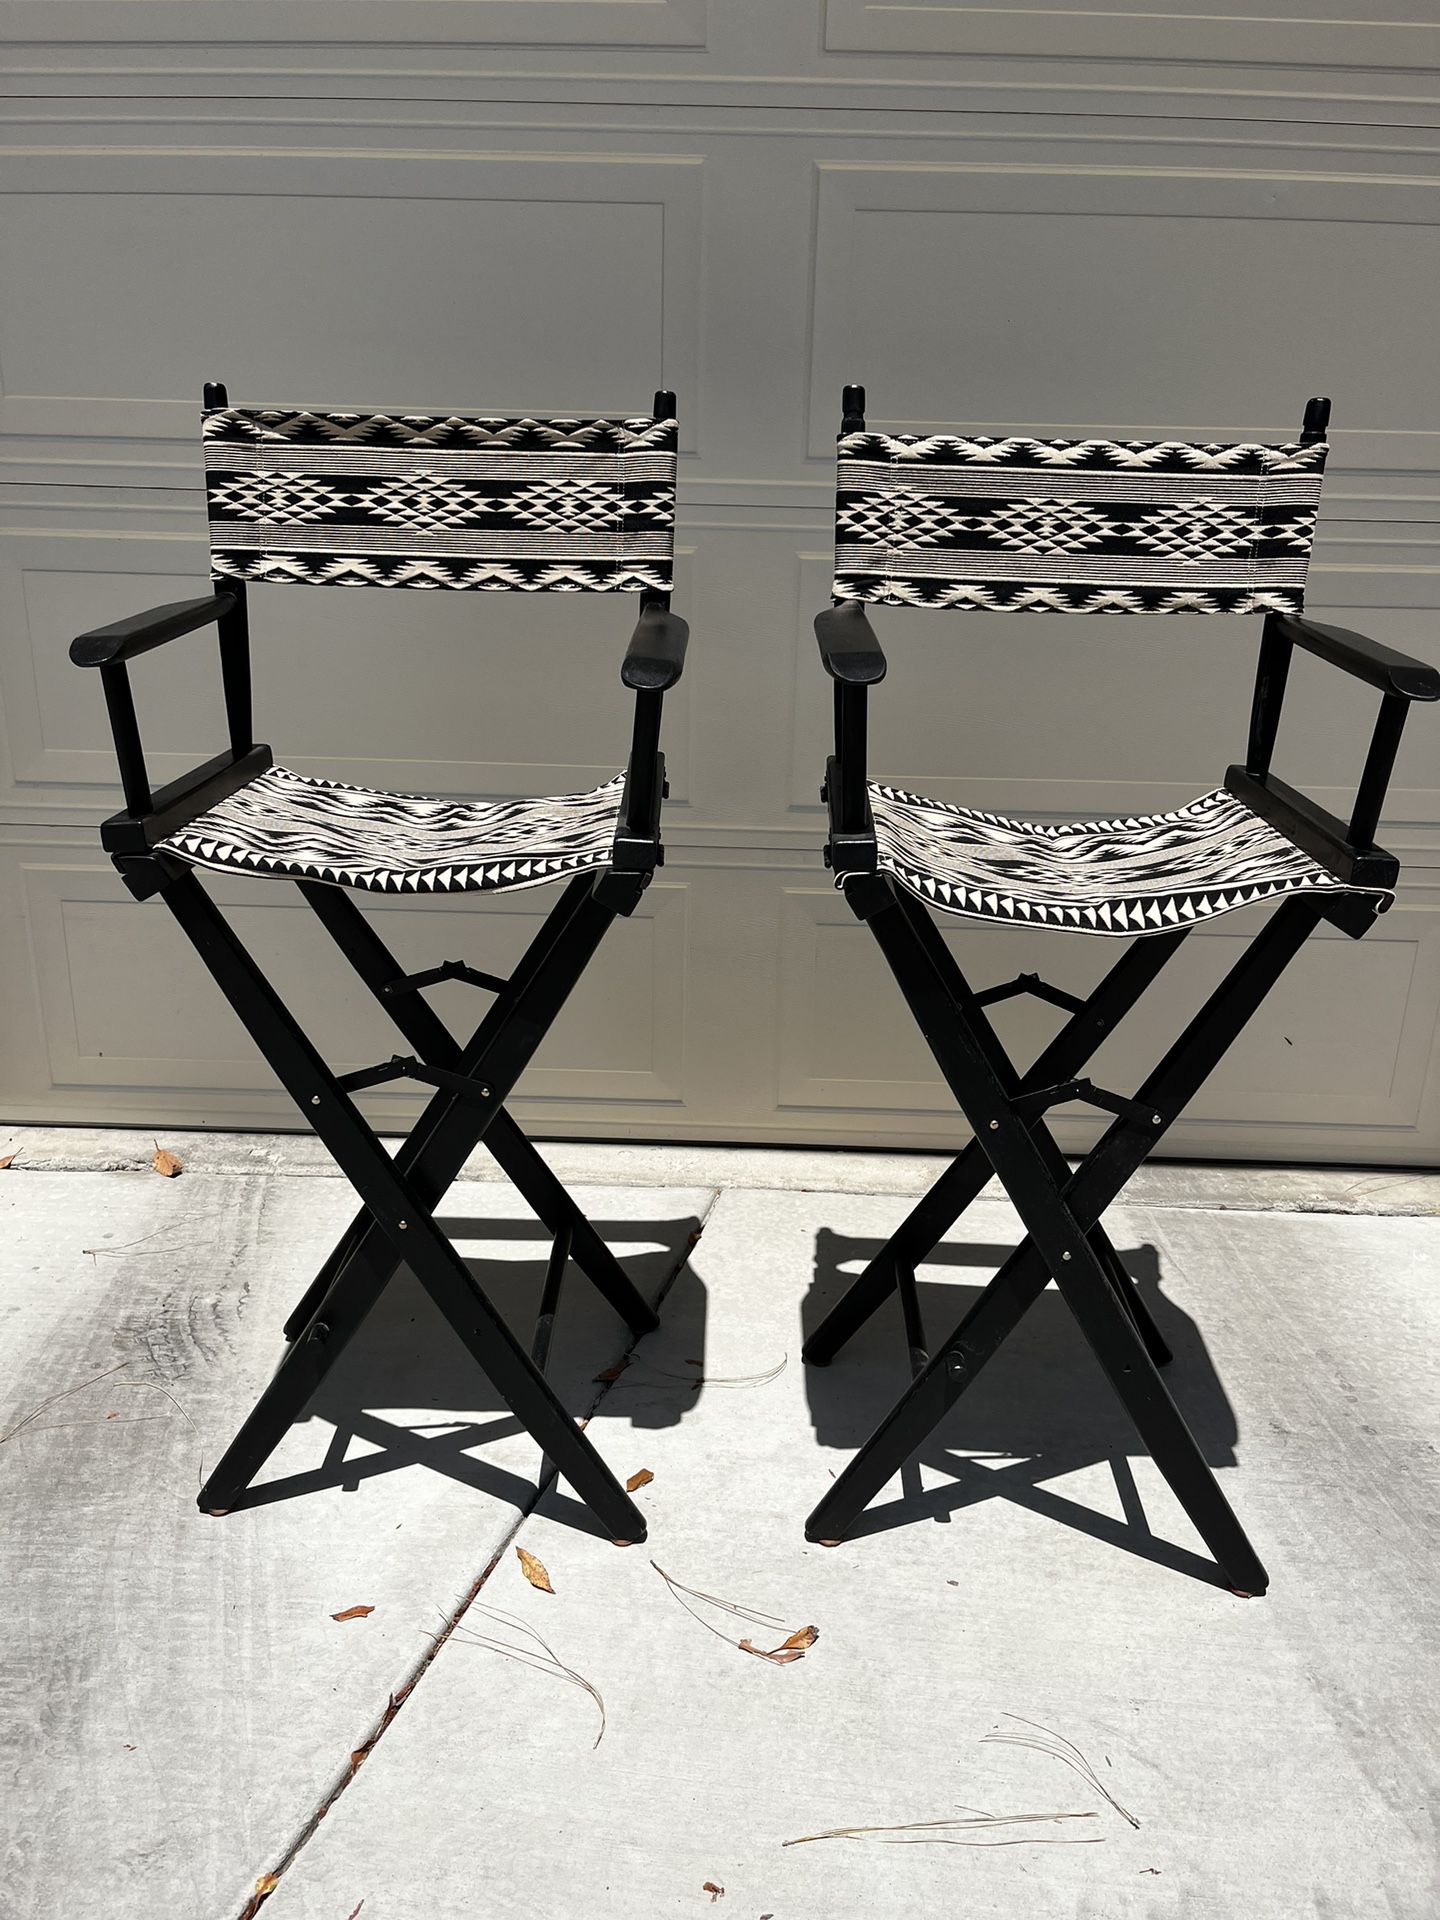 Folding Directors Chairs, Wooden Fabric